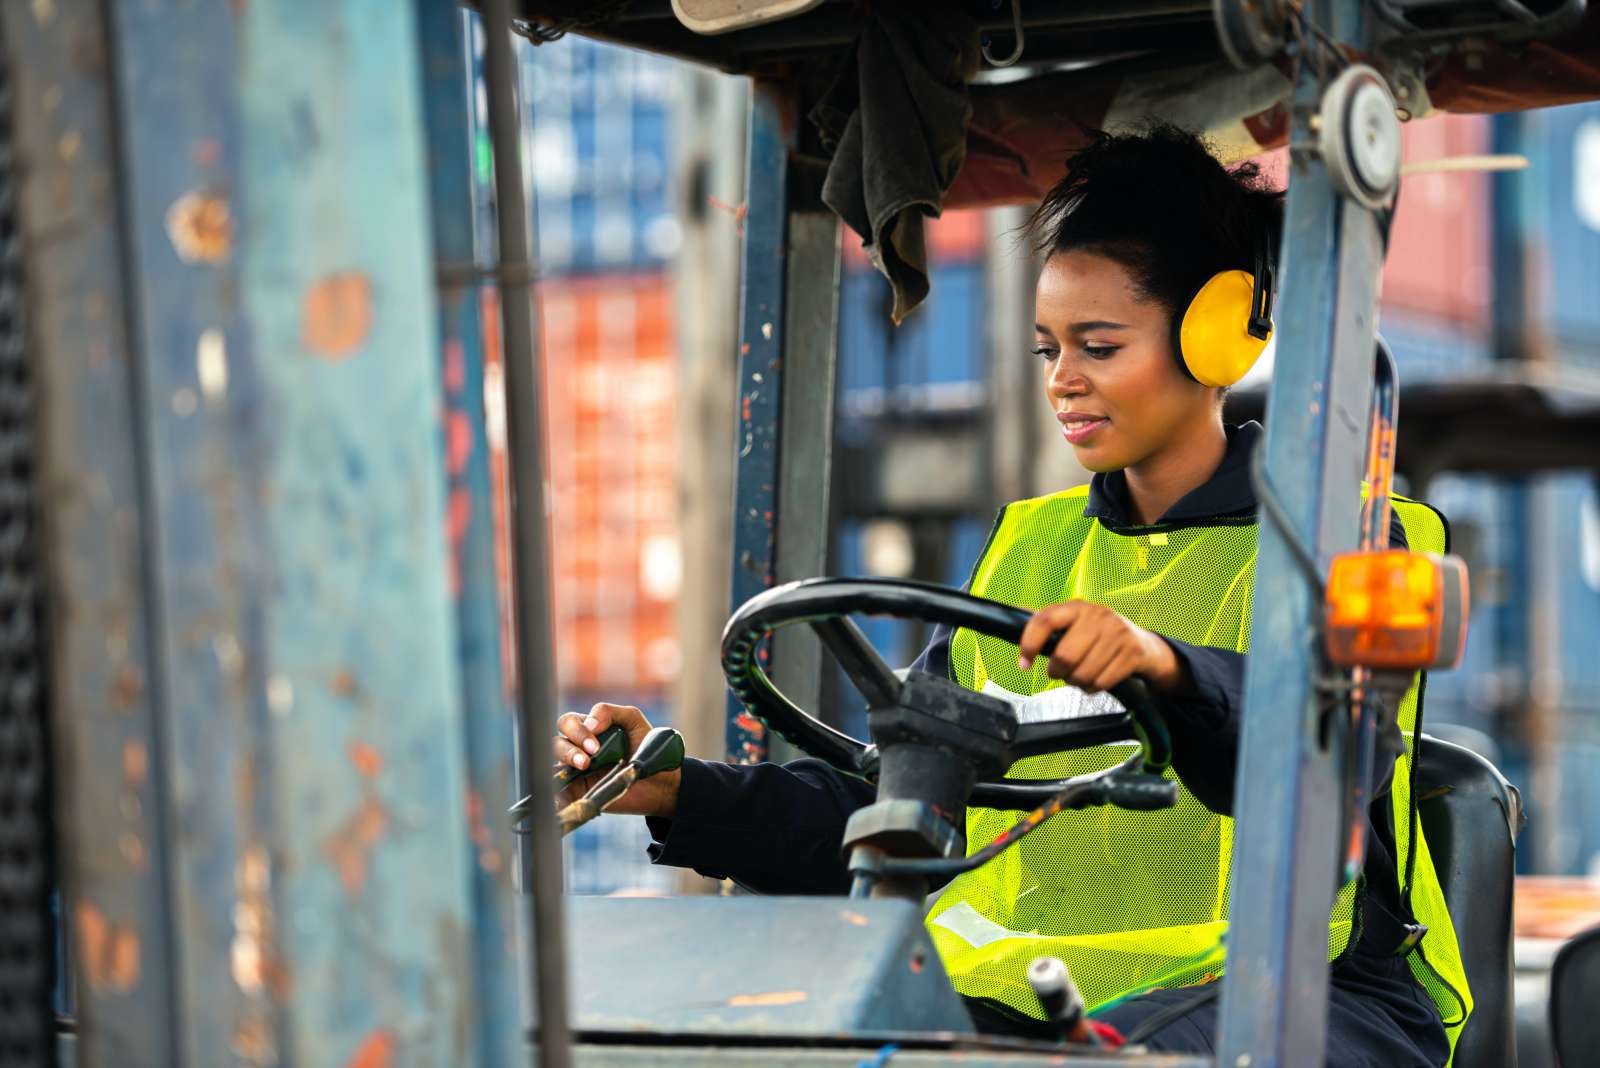 Woman wears safety vest and hearing protection while operating a forklift